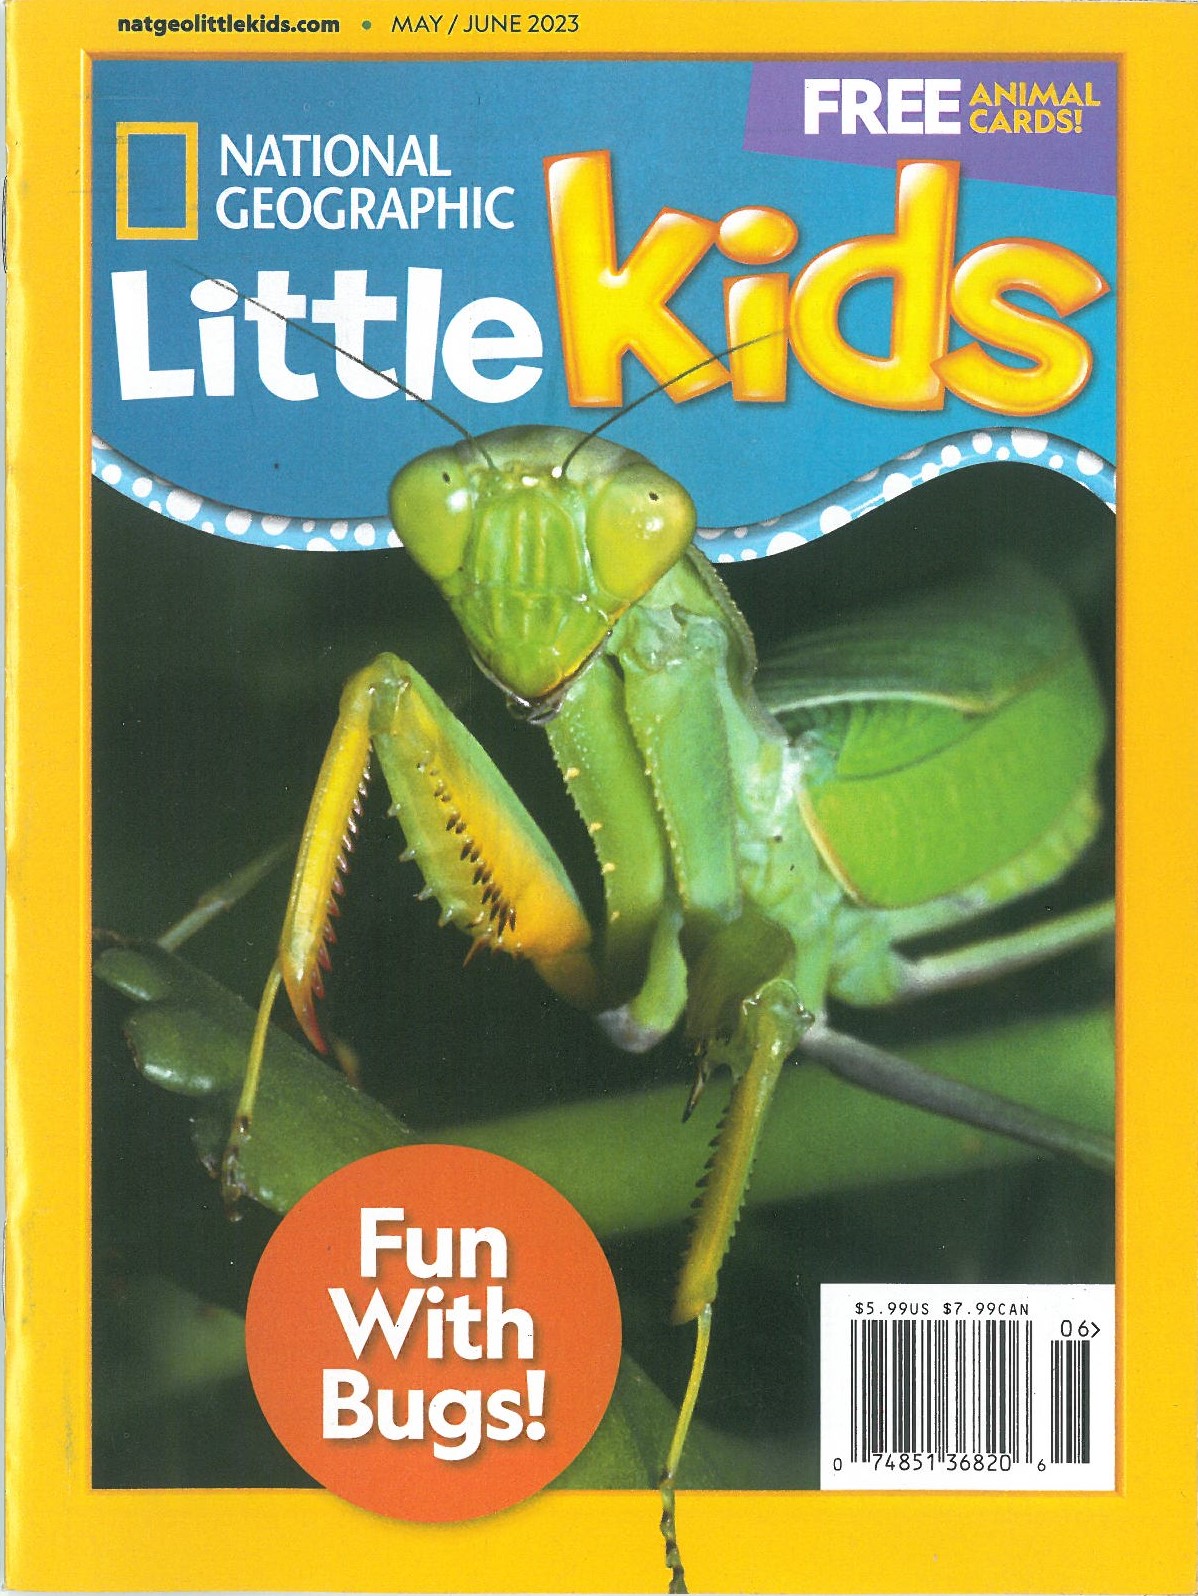 NATIONAL GEOGRAPHIC LITTLE KIDS ISSUE OF NOVEMBER/DECEMBER 2022